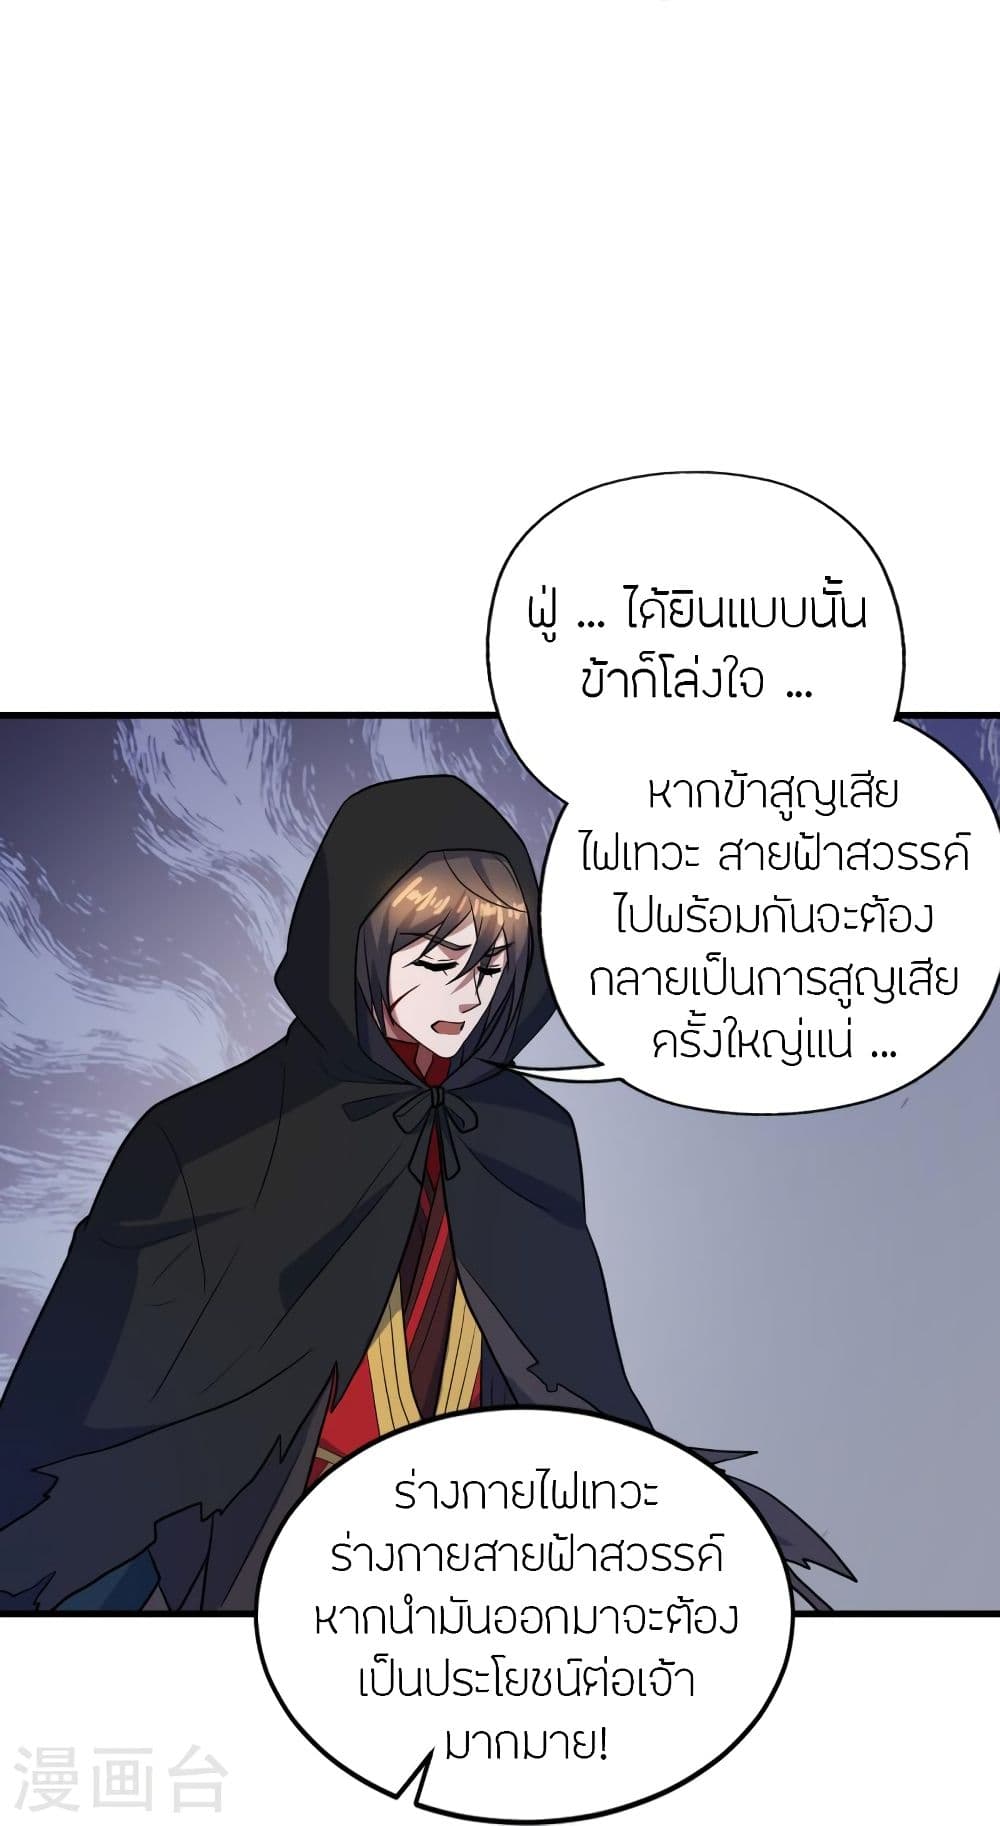 Banished Disciple's Counterattack เธเธฑเธเธฃเธเธฃเธฃเธ”เธดเน€เธเธตเธขเธเธขเธธเธ—เธ 304 (79)